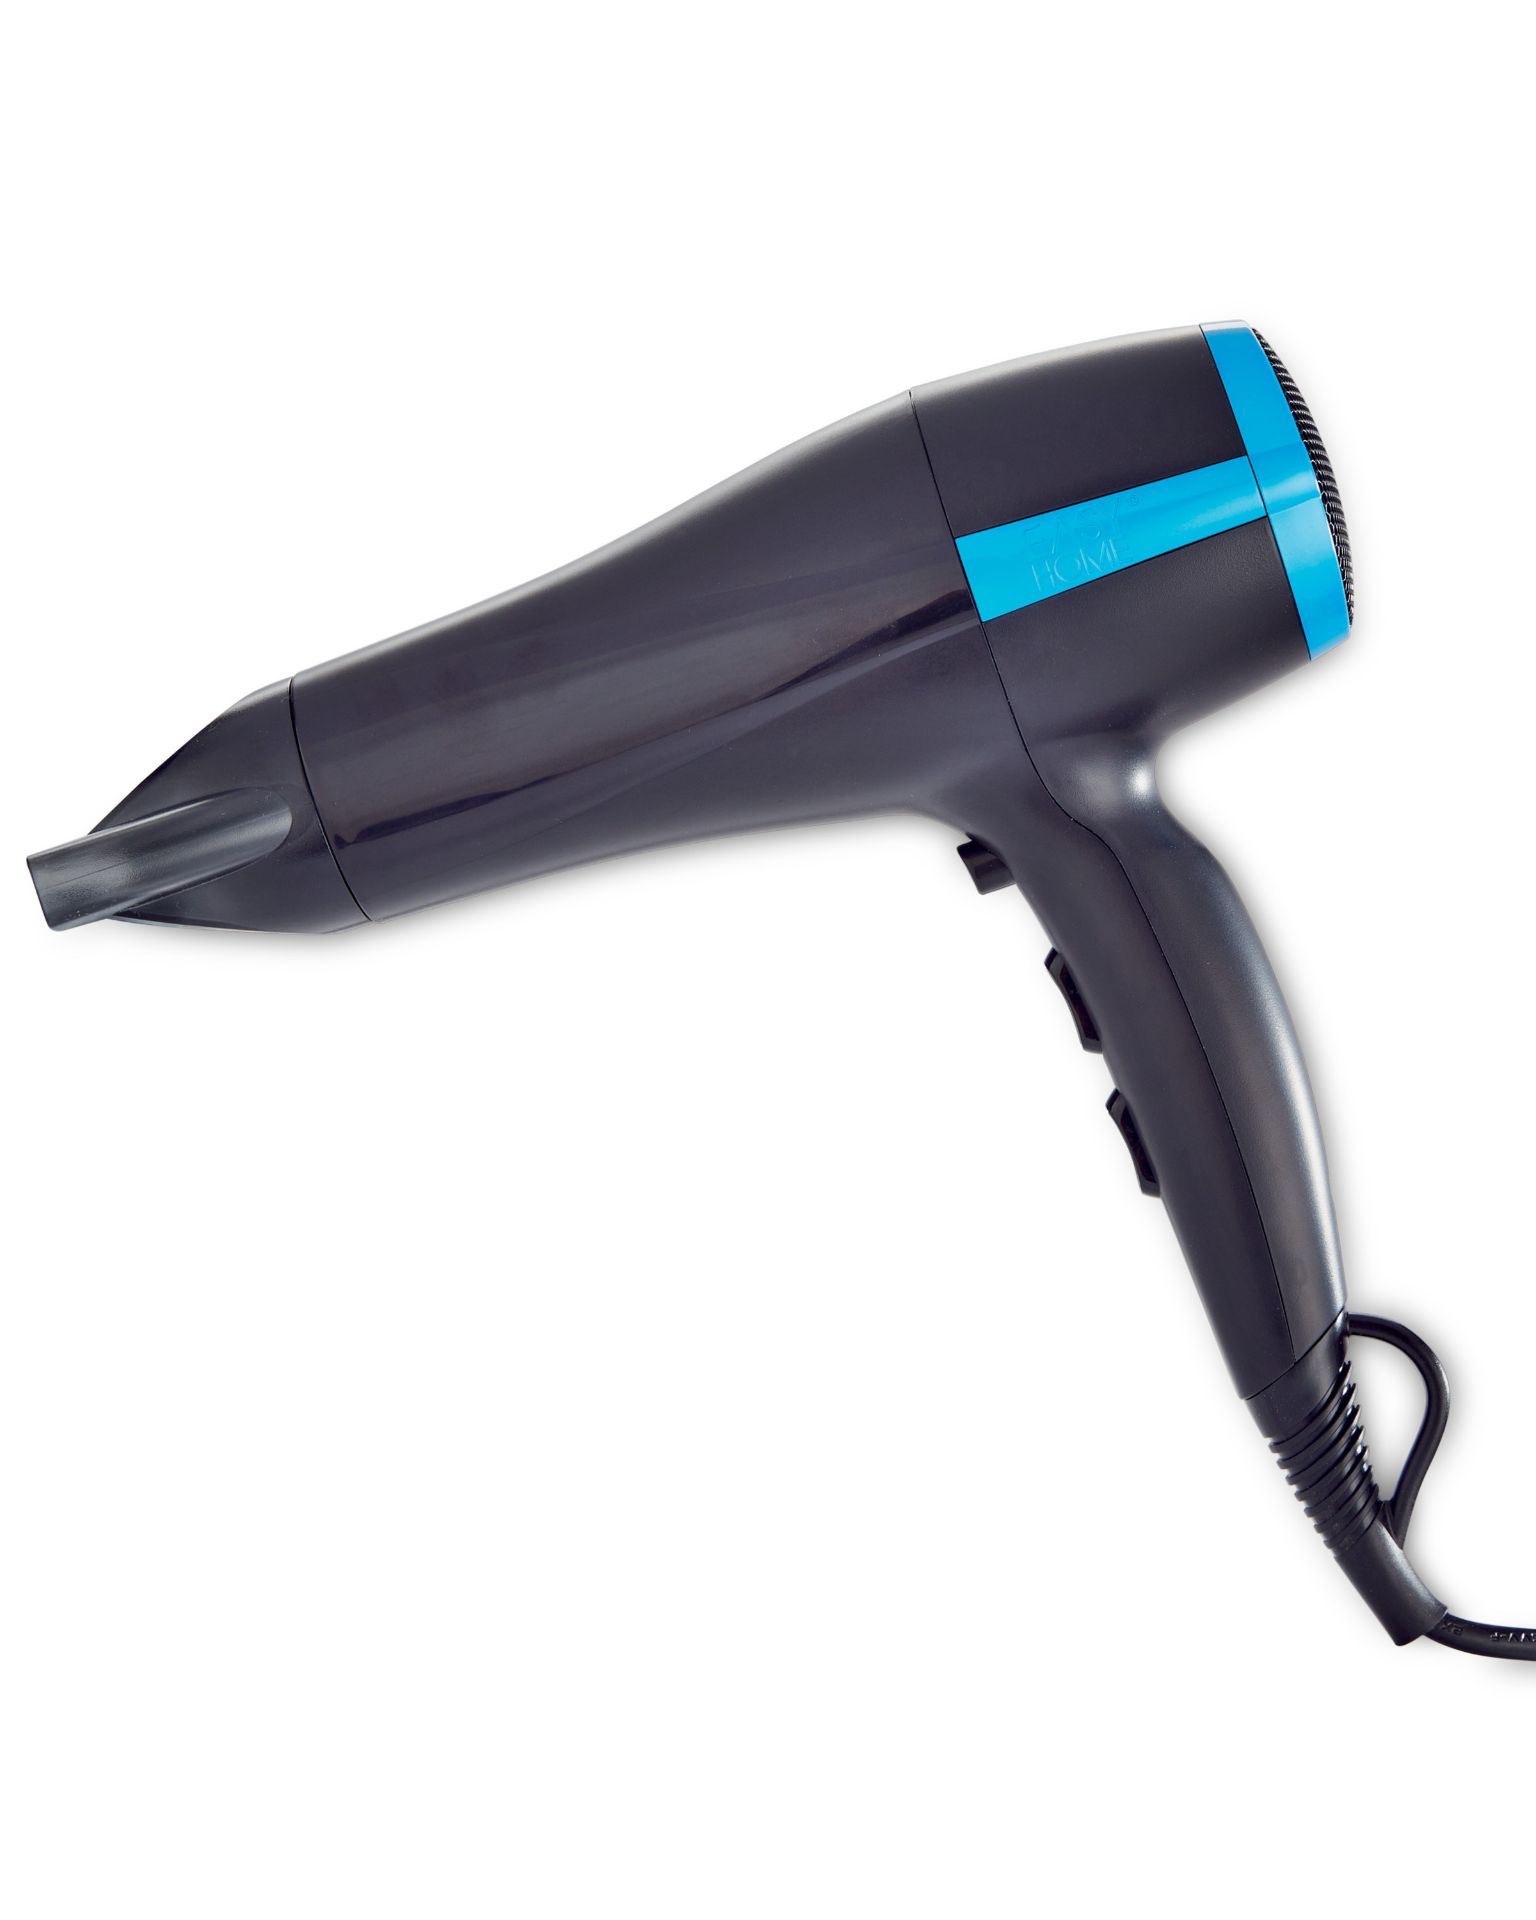 V Brand New Easy Home Ionic Hairdryer-Faster Drying-Revival Of The Hair Structure (item is similar